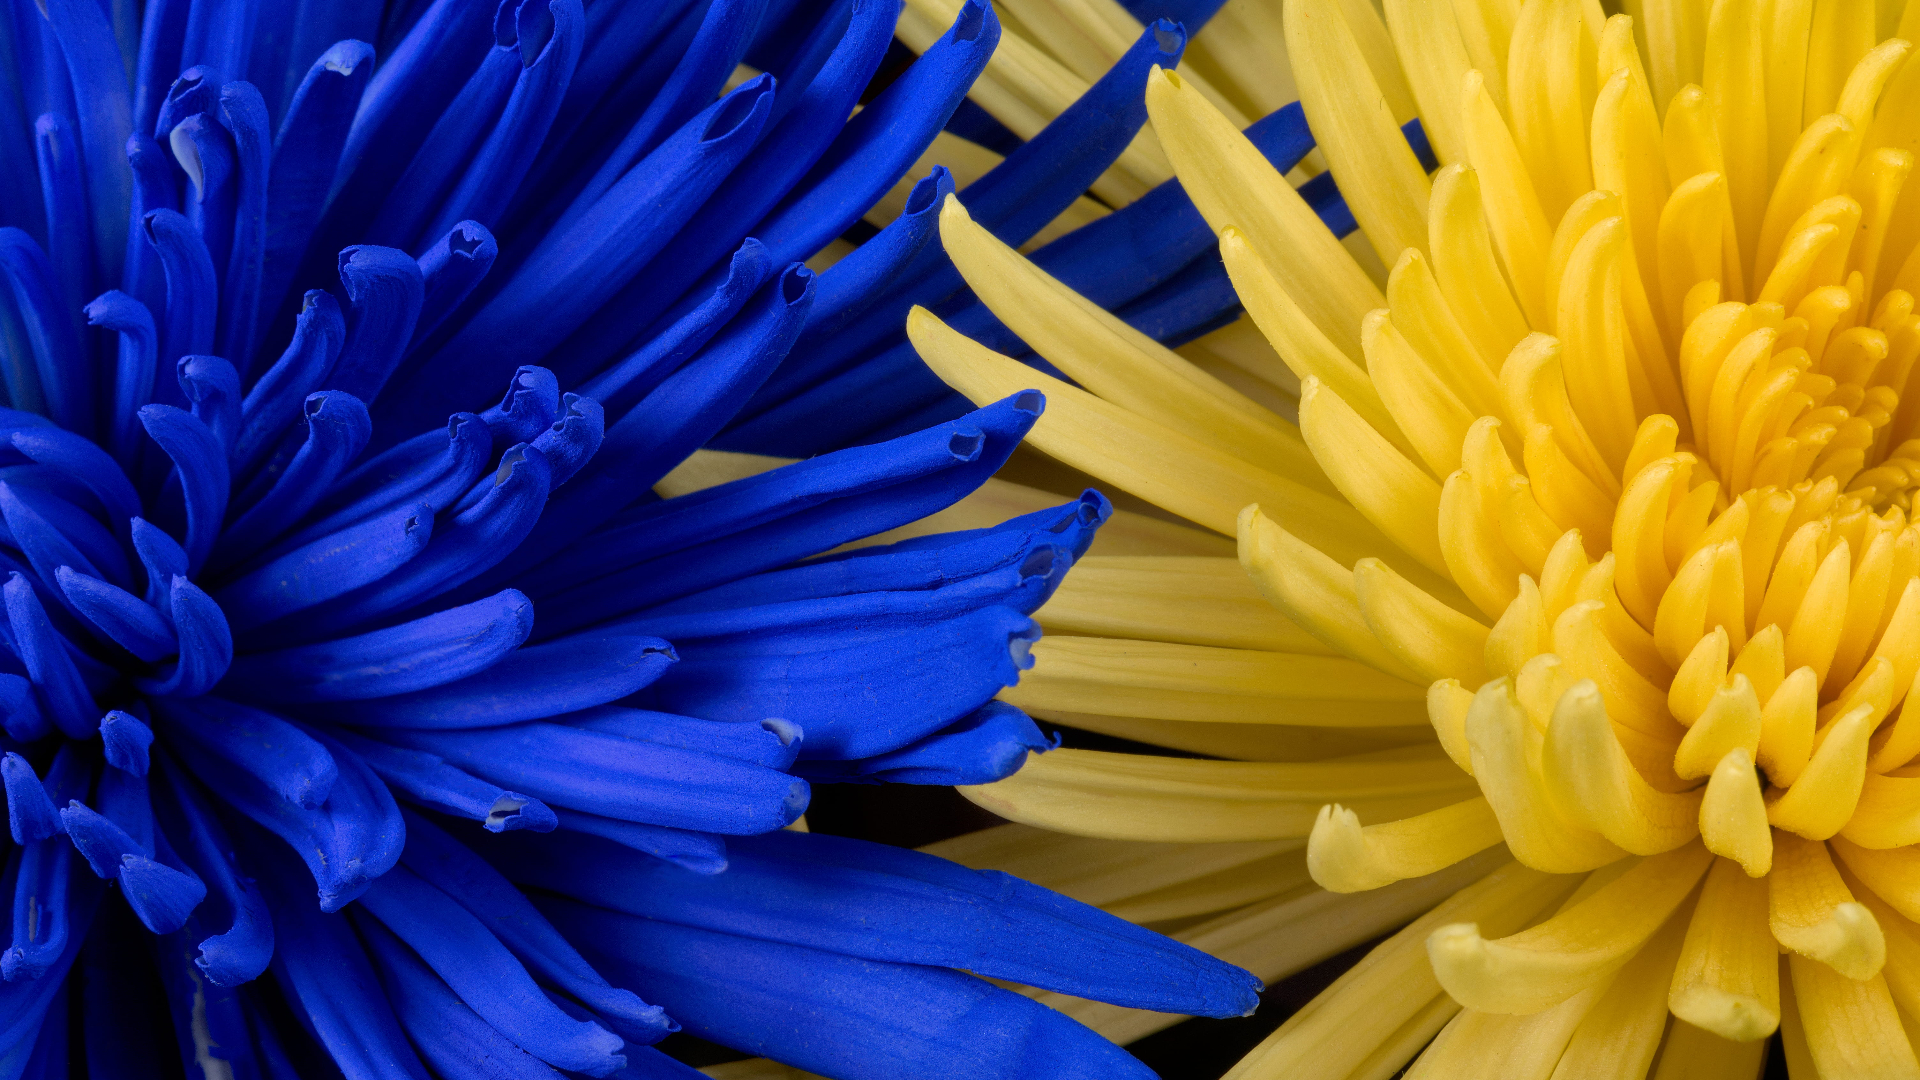 Flowers Yellow Flowers Blue Blooming Petals Abstract 1920x1080